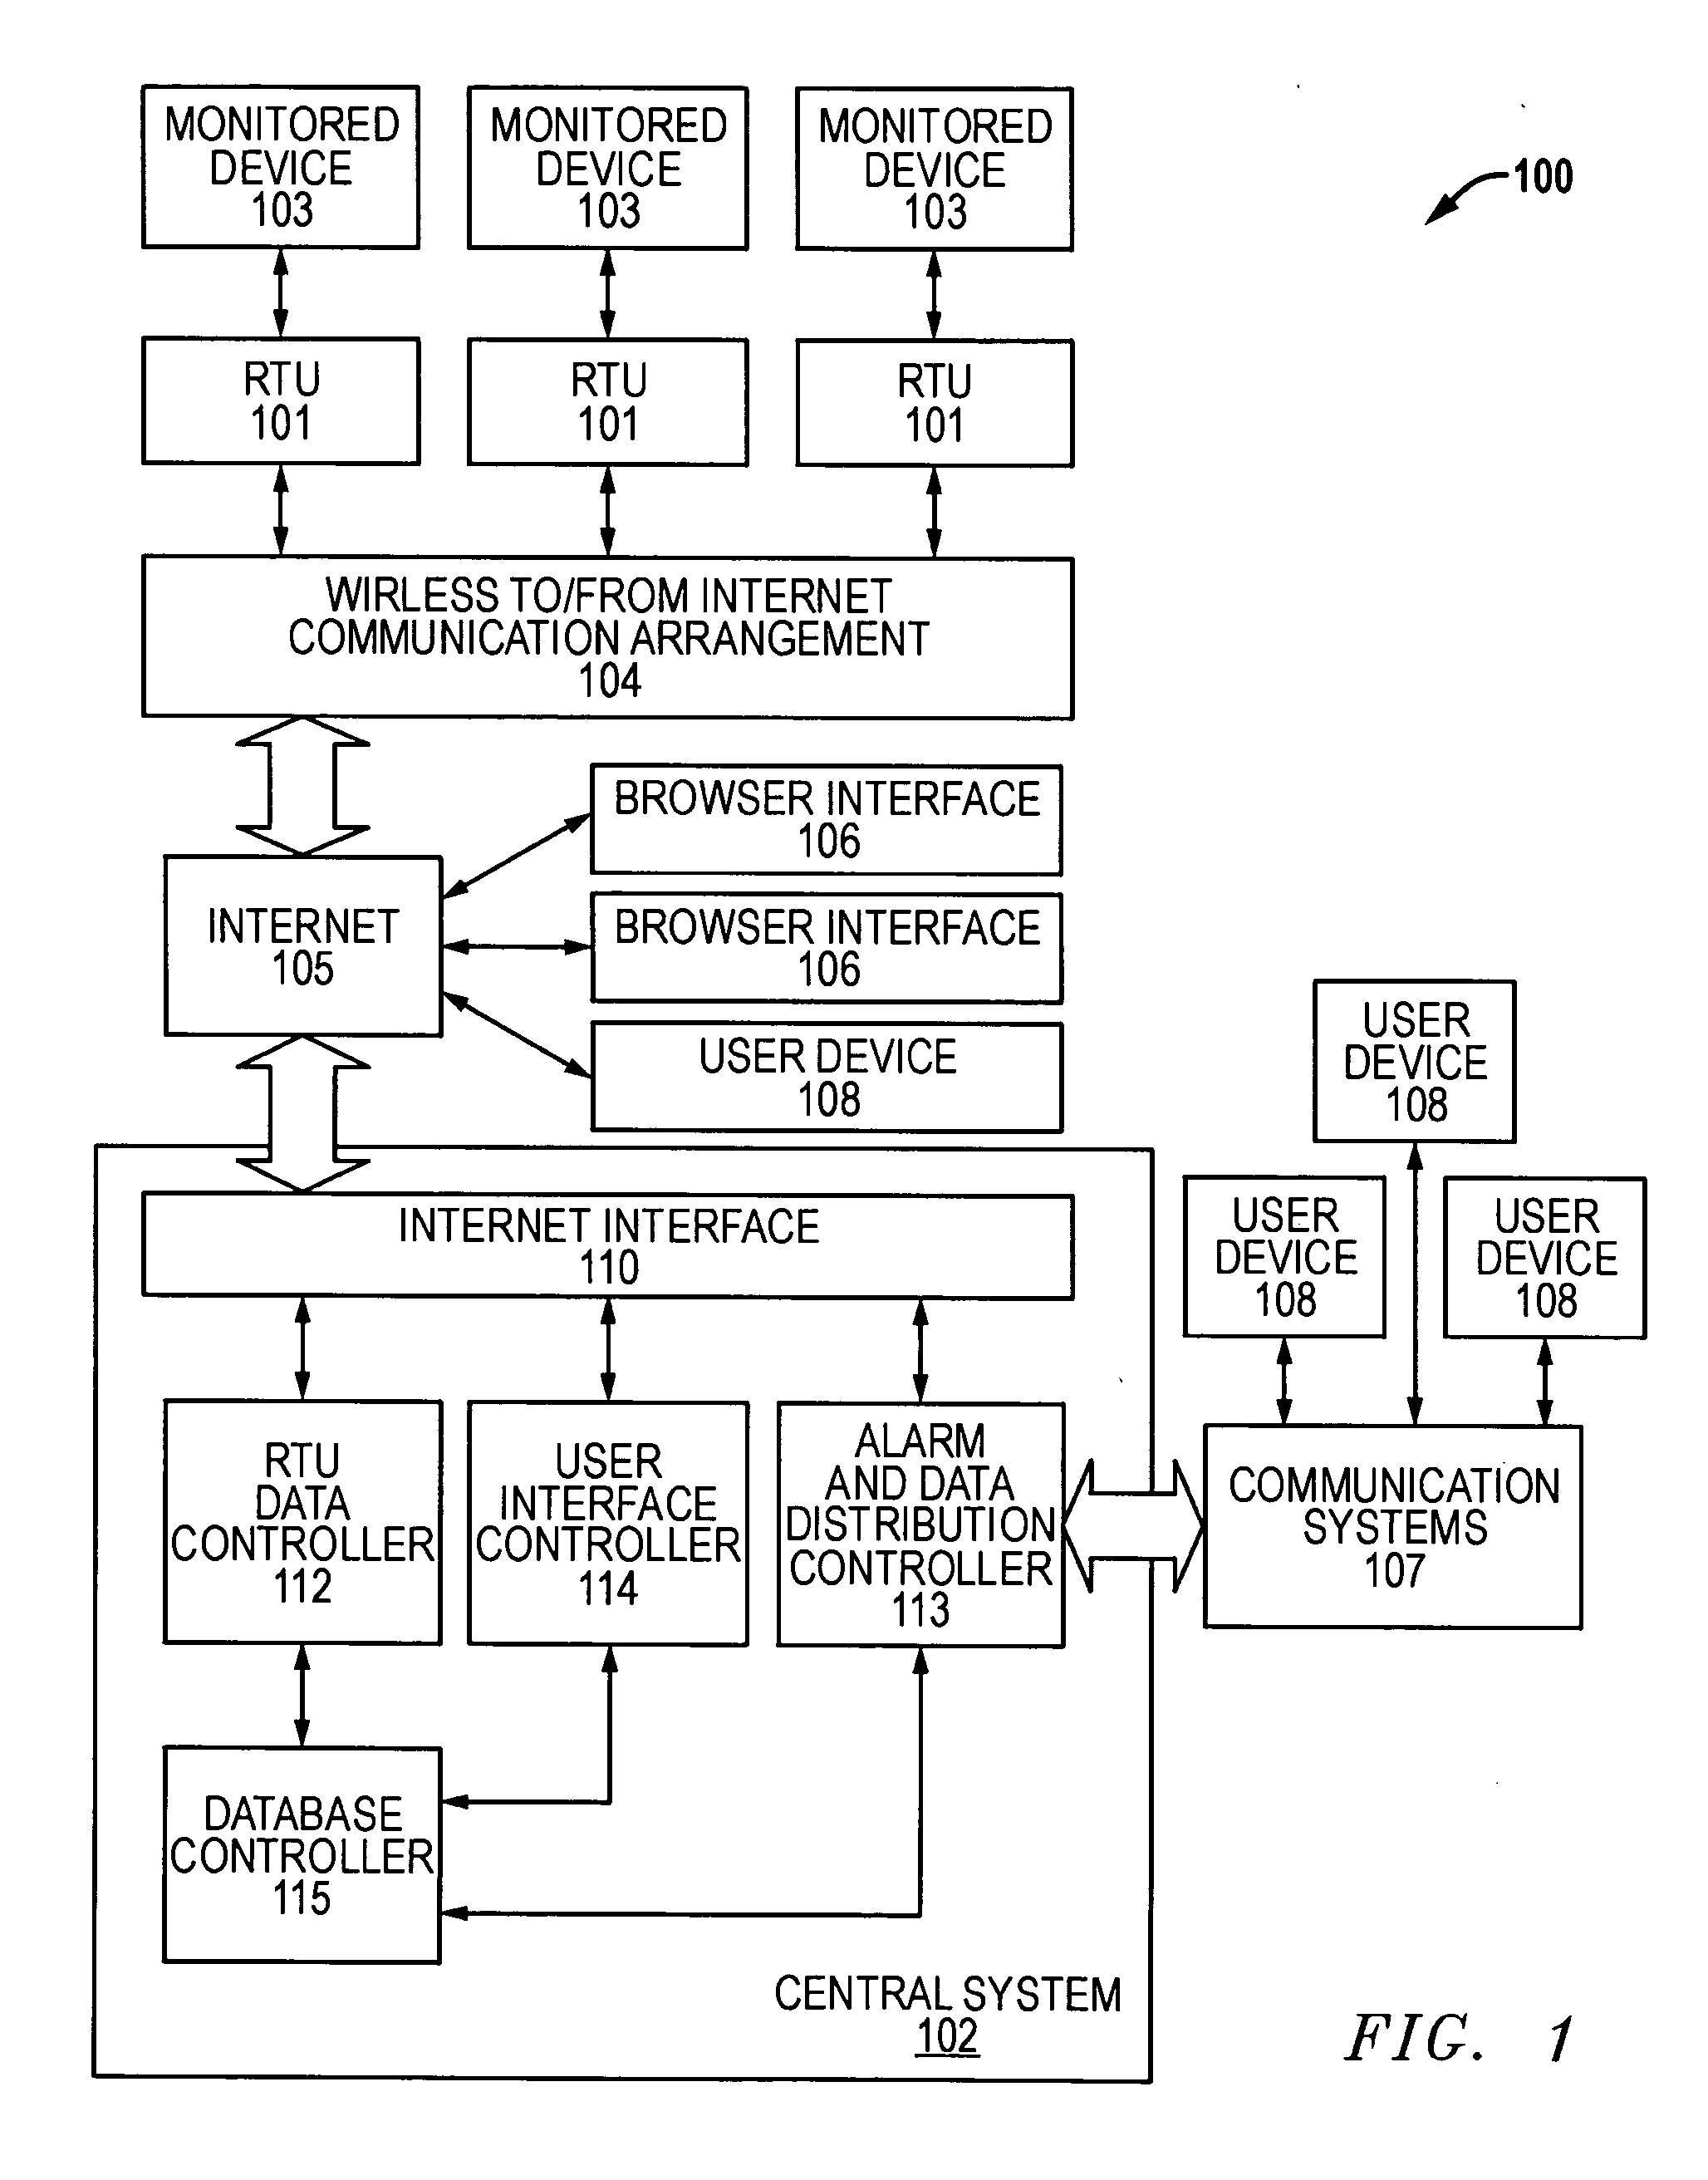 Remote terminal unit and remote monitoring and control system